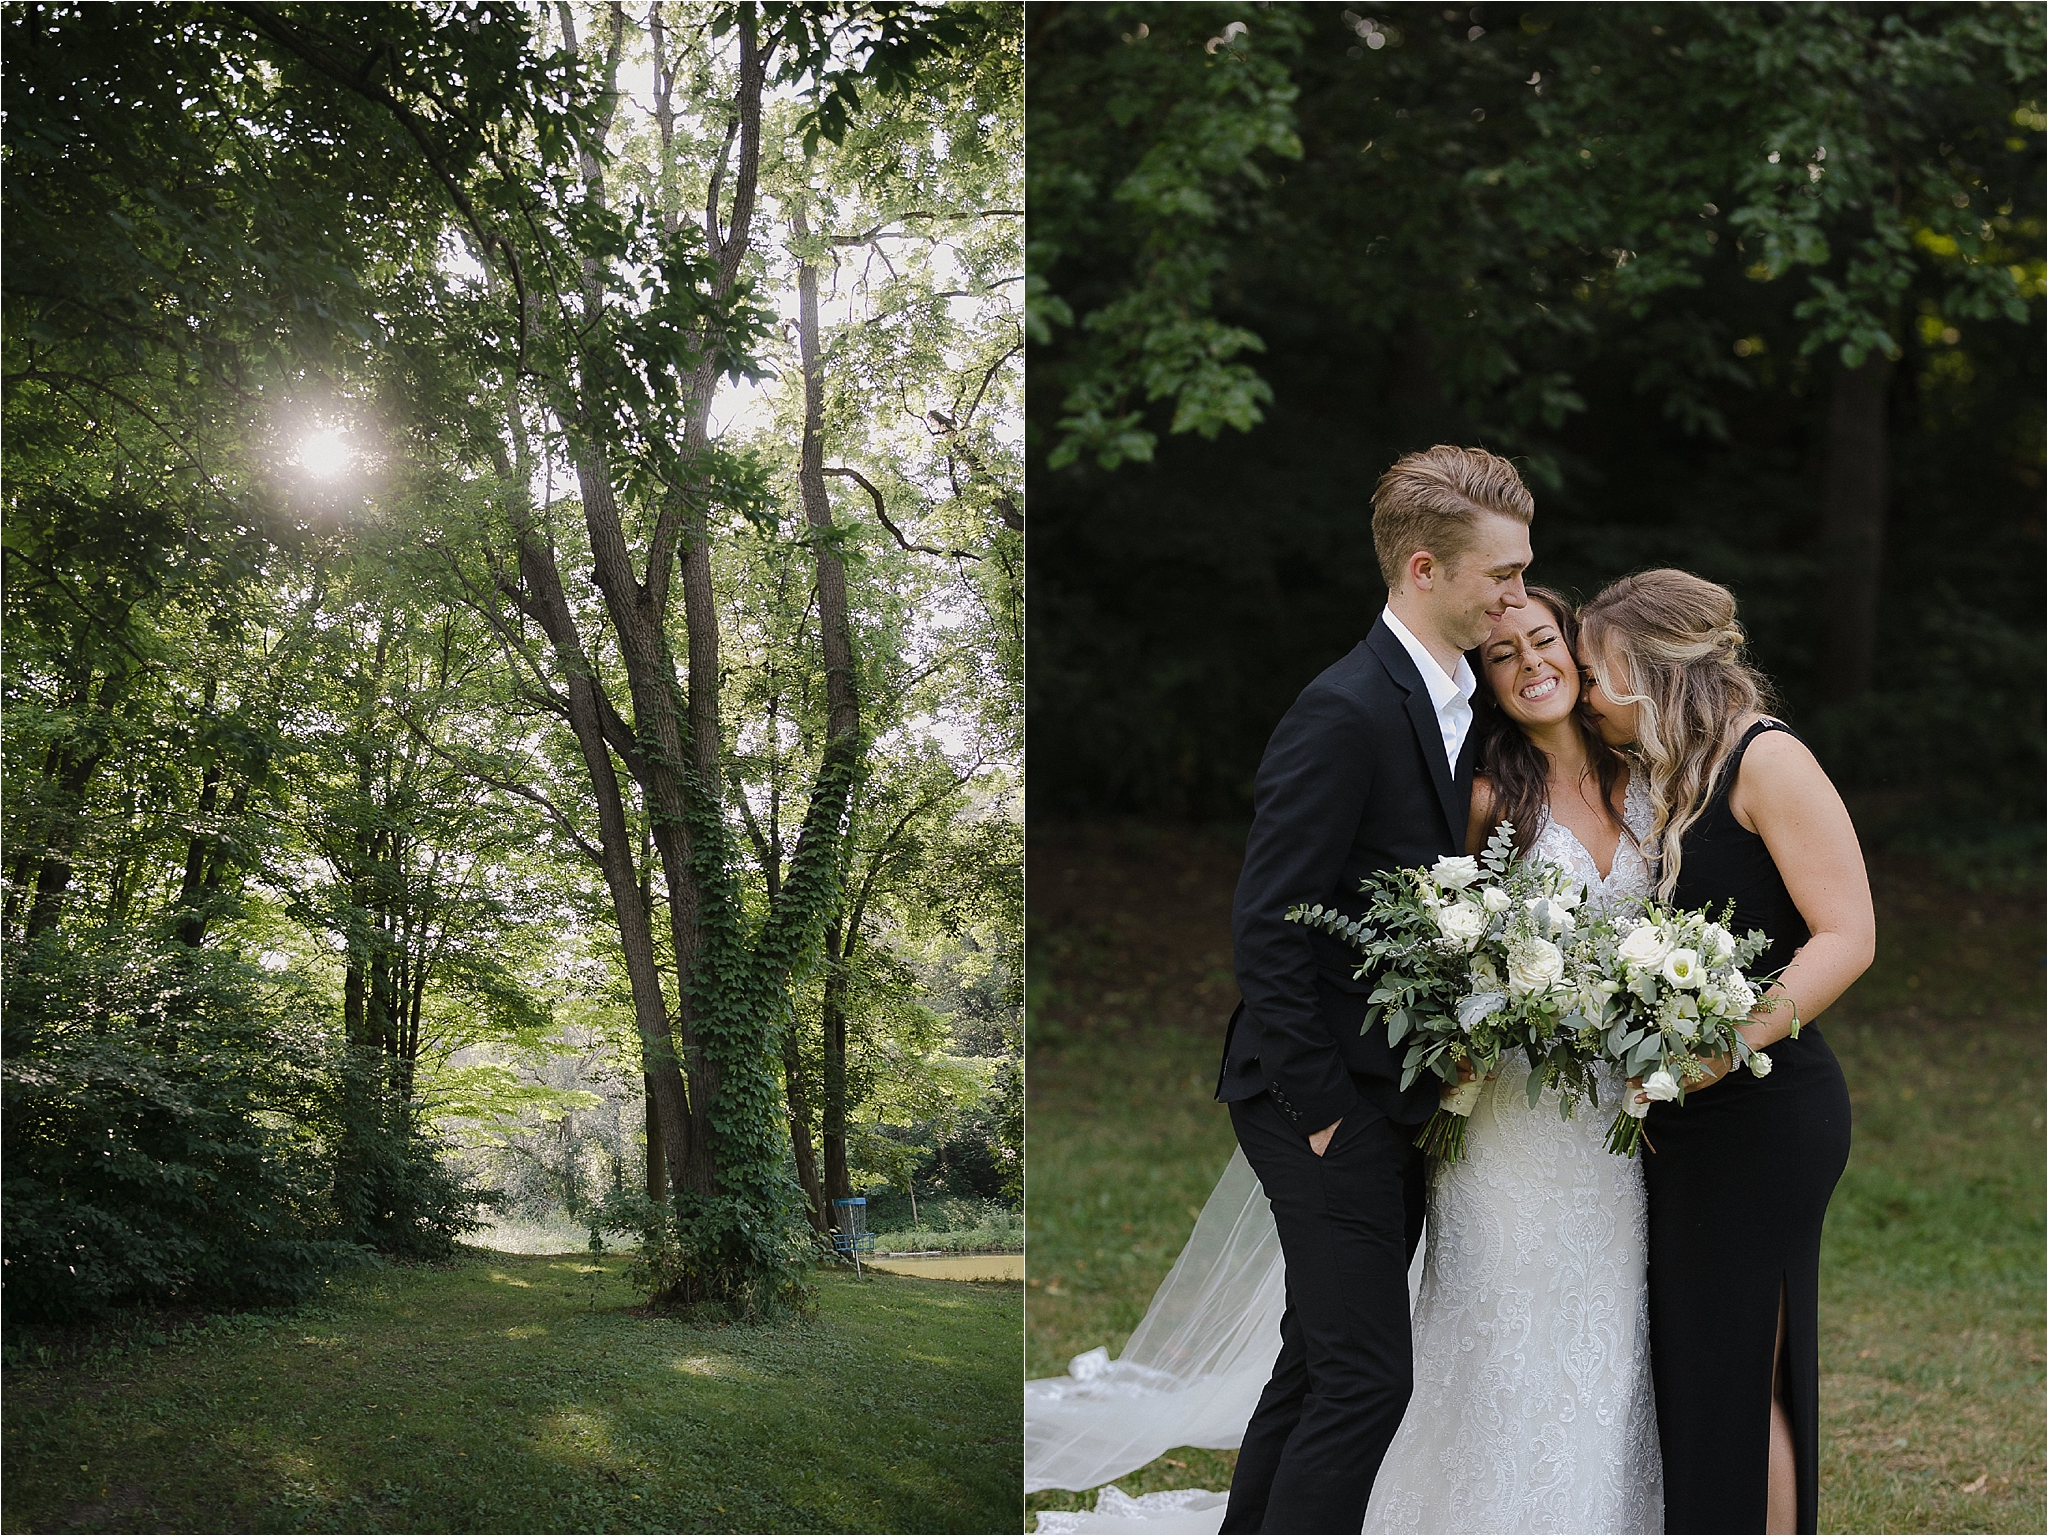 summer, wedding, st. catharines, ontario, chic, boho, public park, tented wedding, greenery, garlands, green and white florals, flowers, bouquets, dog, dogs, pizza, midnight snack, church, ceremony, arbor, reception, budget, bridesmaid, dress, black